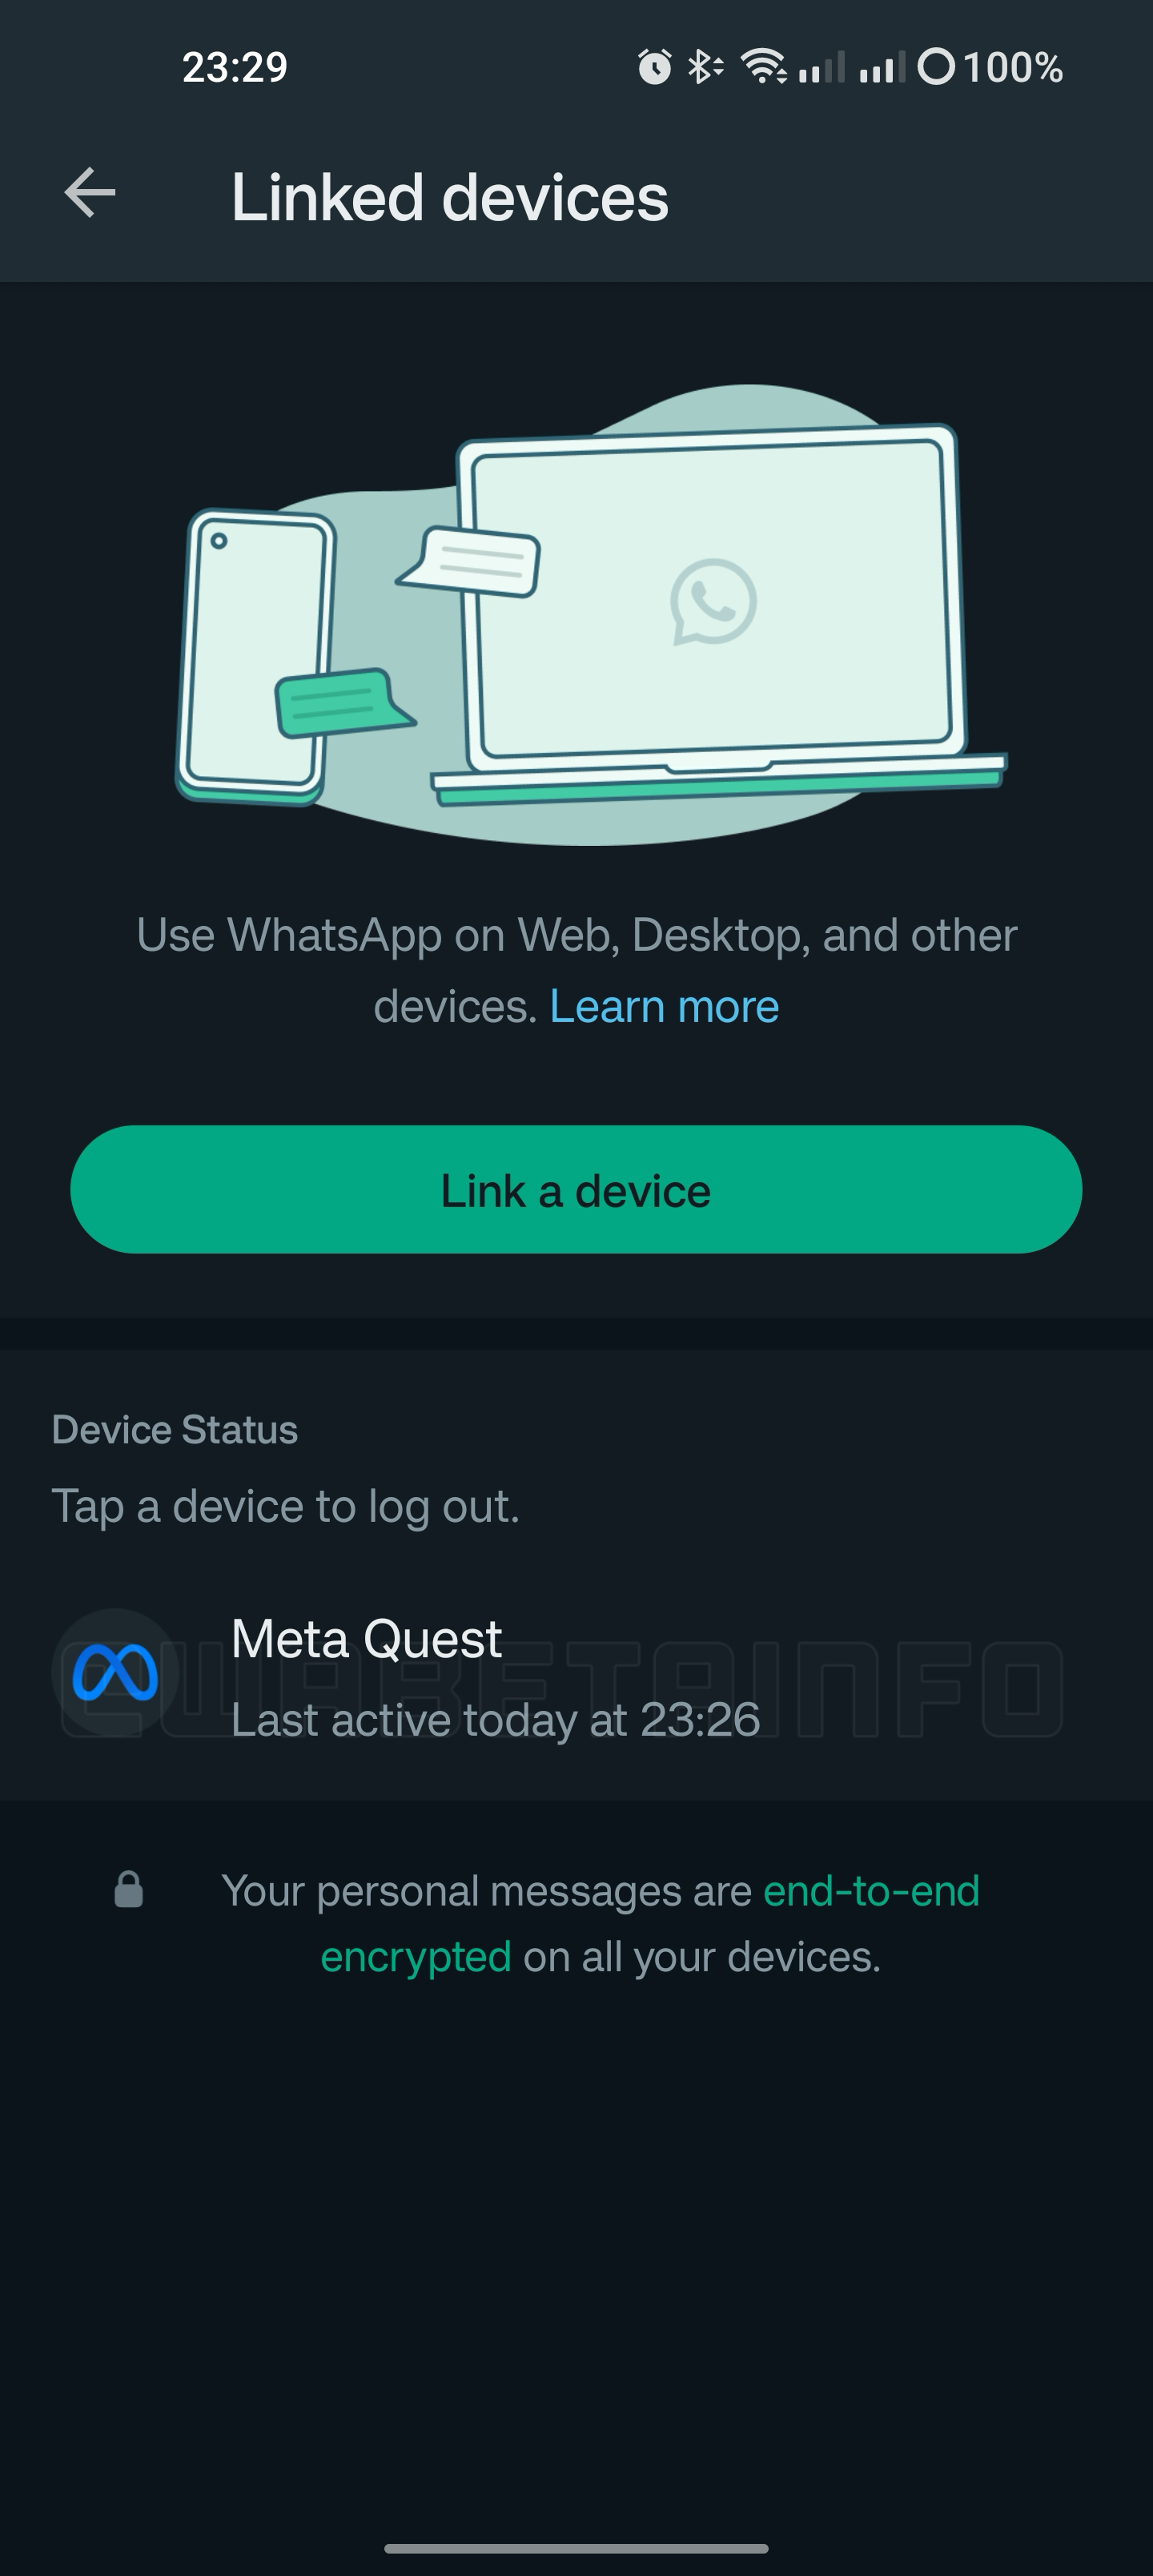 whatsapp is working on meta quest-linked devices feature on android - the go android